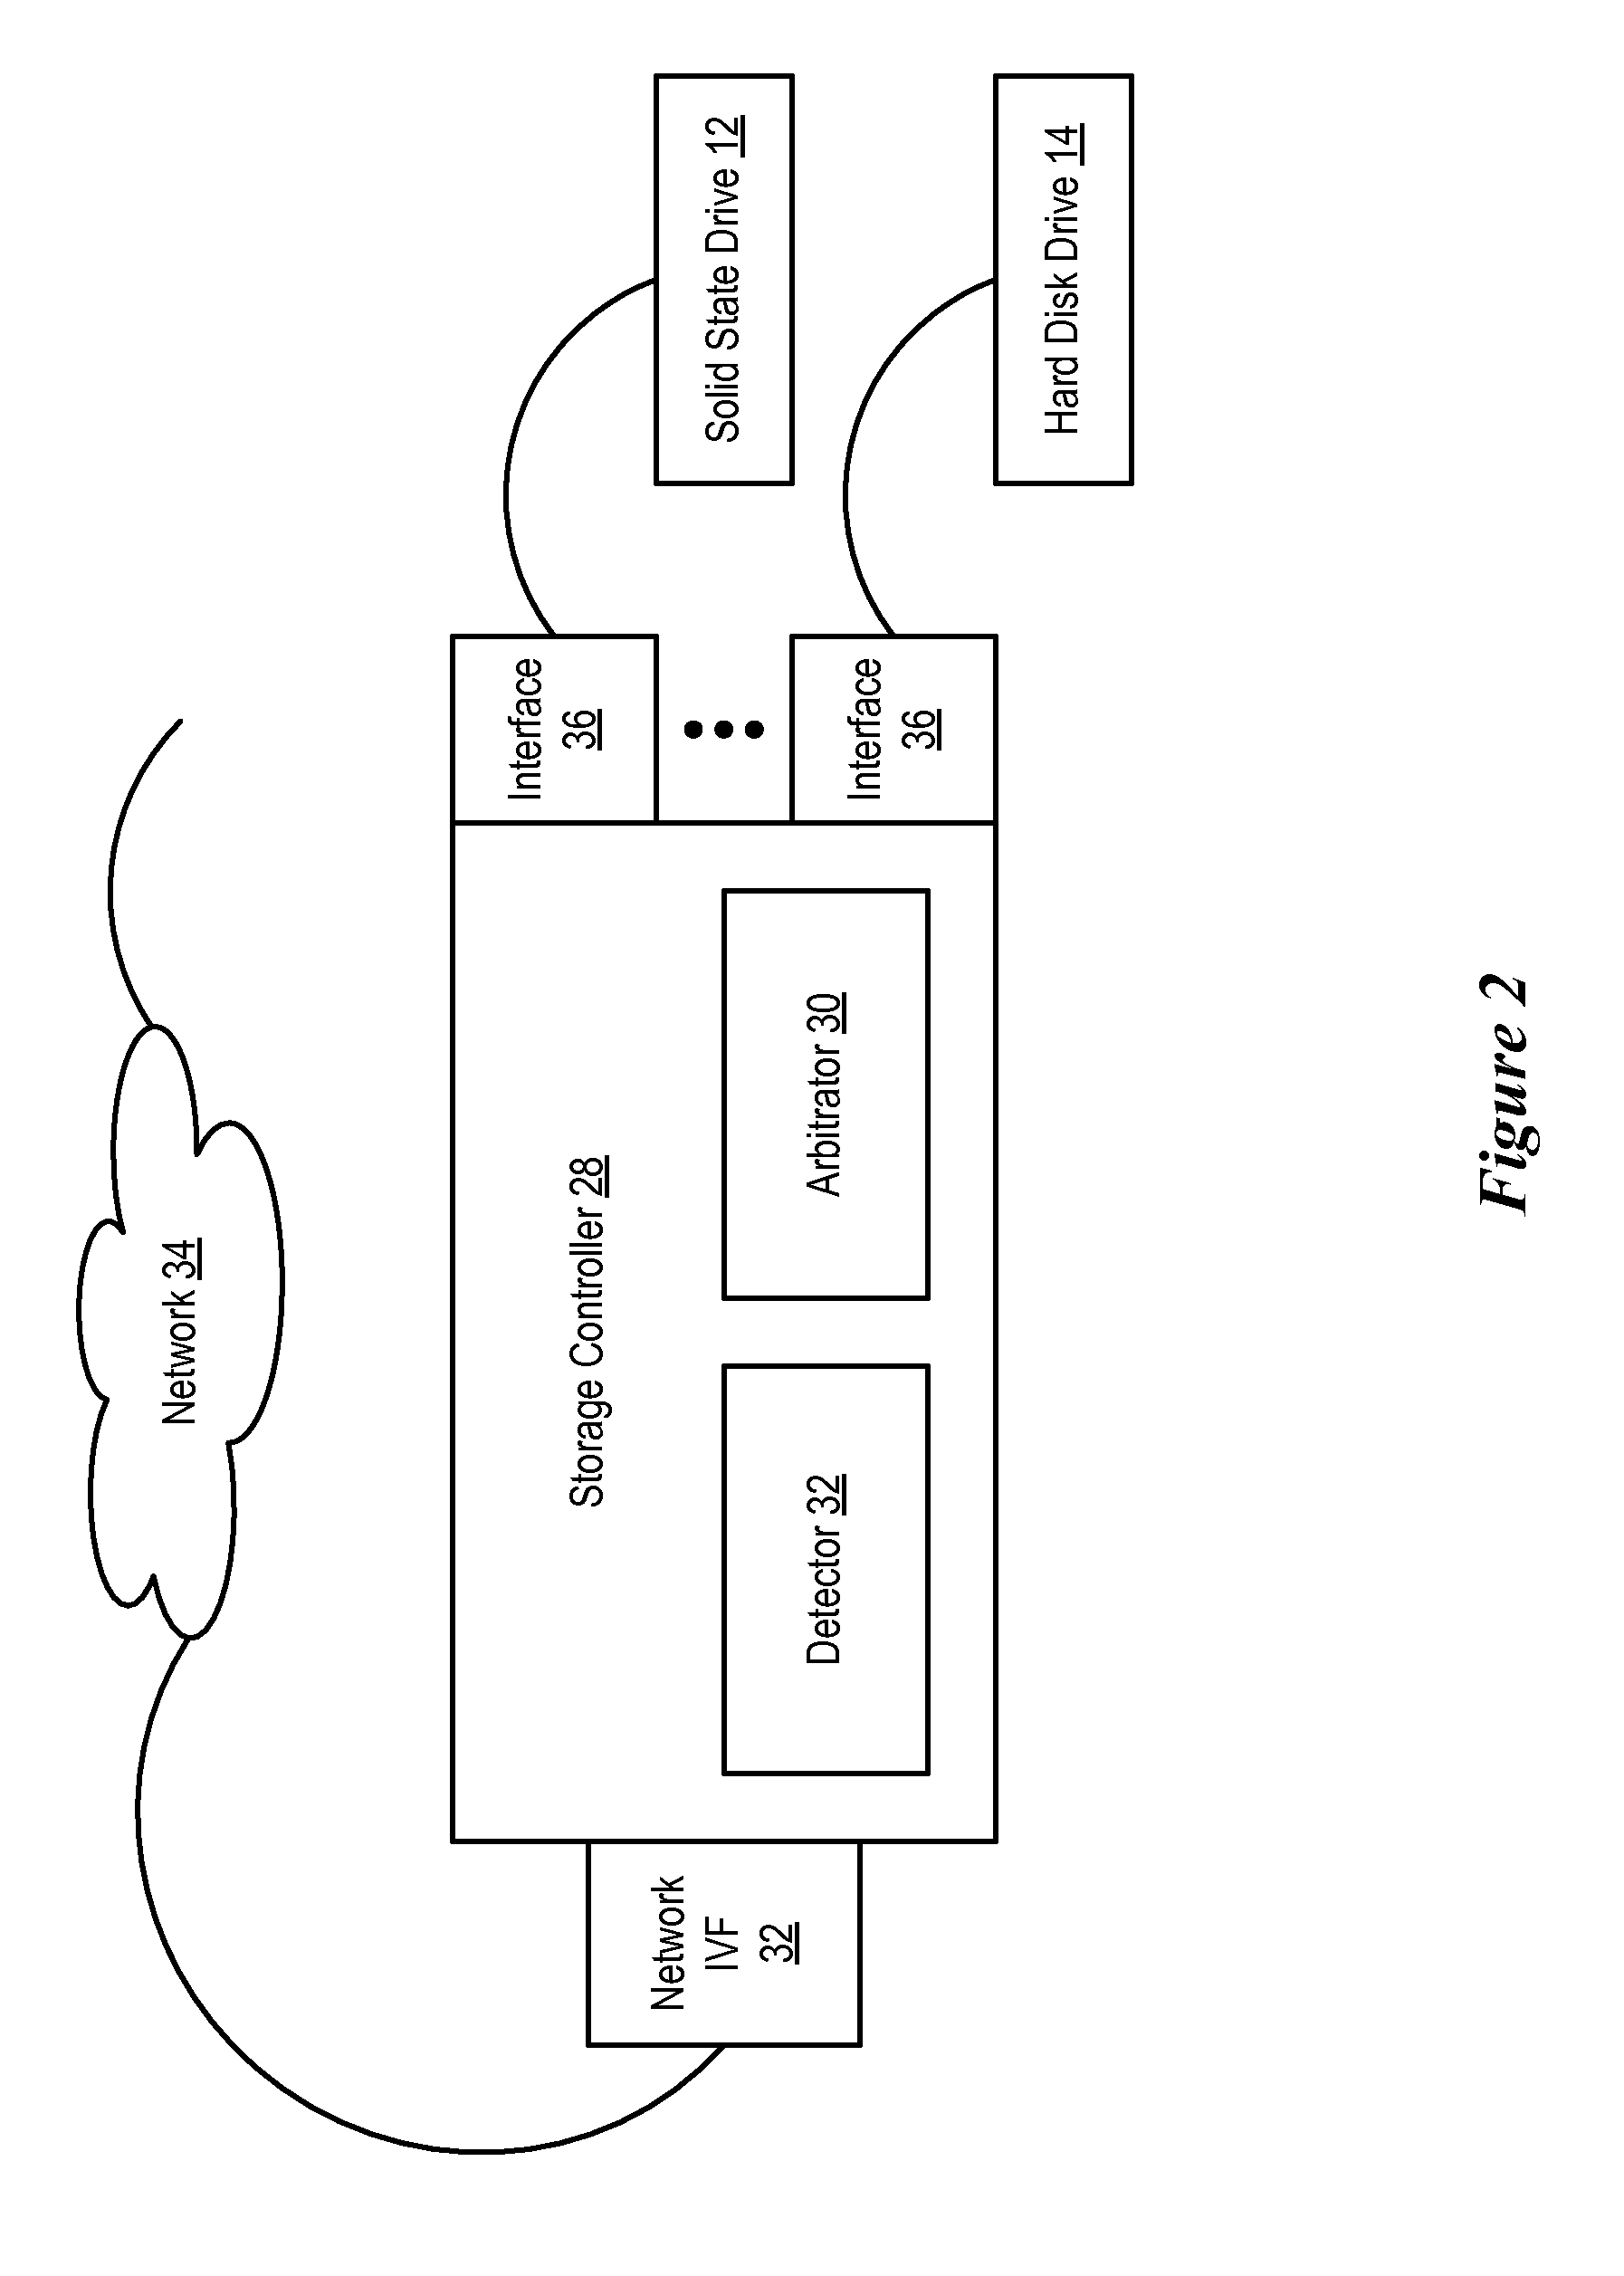 System and Method for Information Handling System Operation With Different Types of Permanent Storage Devices